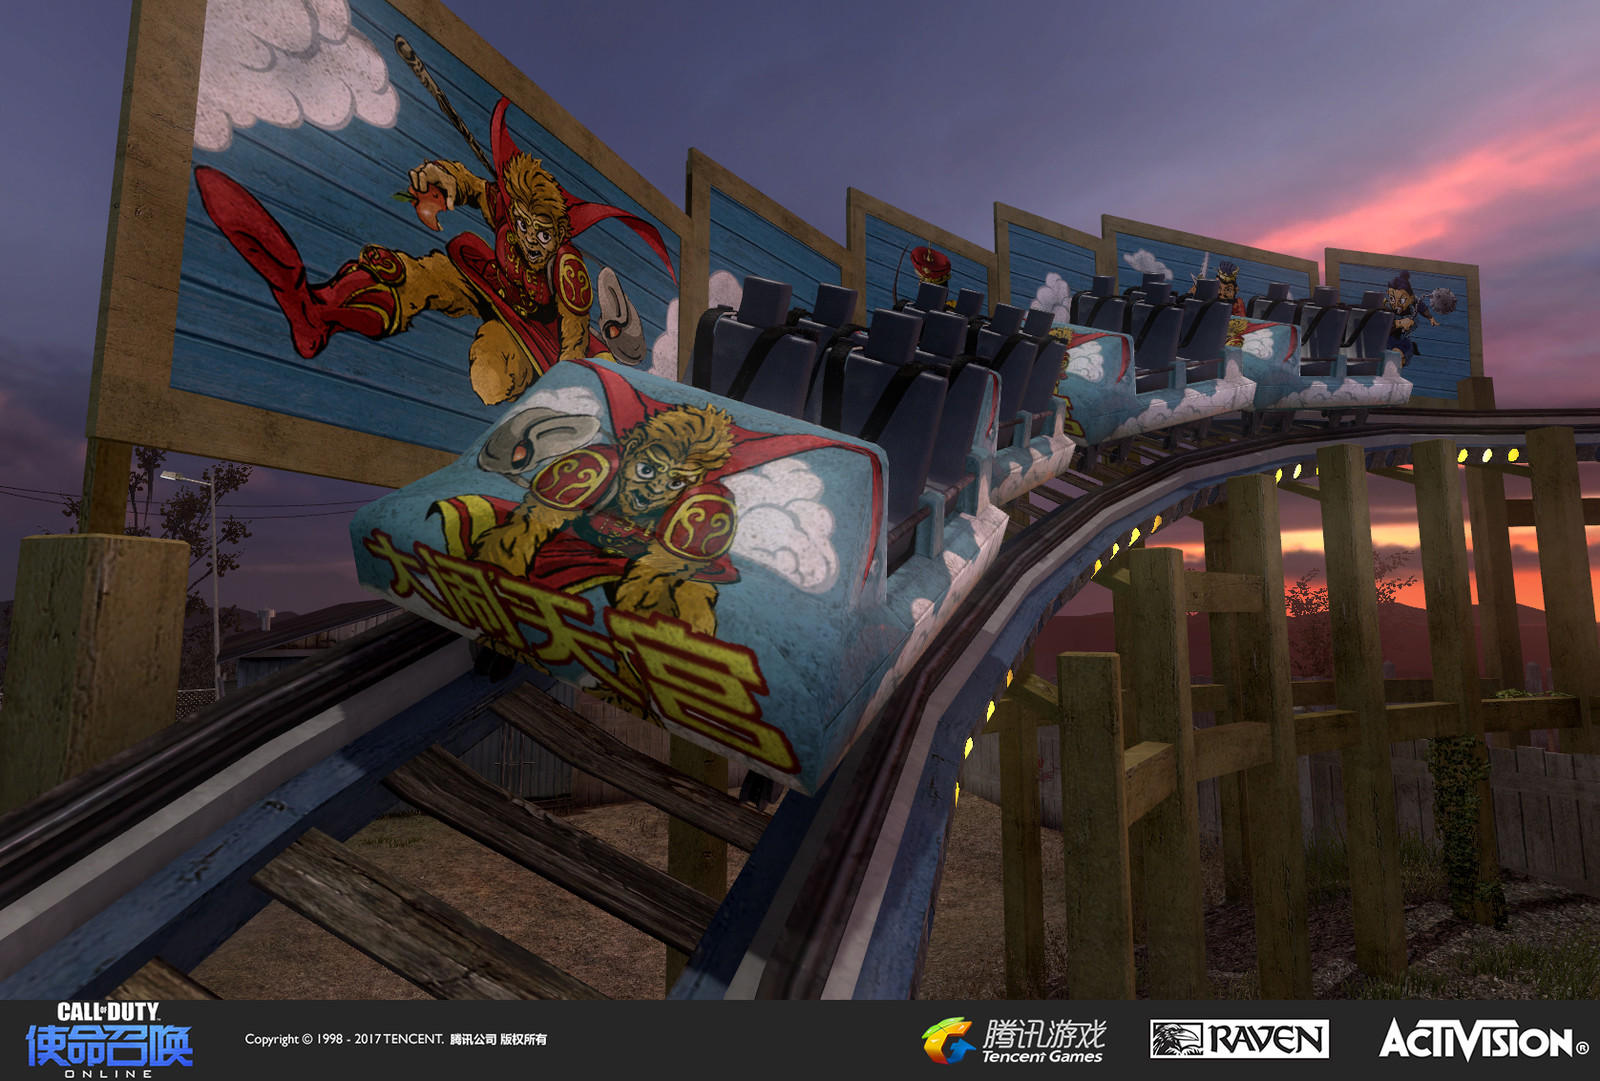 Carnival: The roller coaster was re-themed to comply with the Monkey King theme and I applied my atwork to the stalled cars on the tracks as well as to various points throughout the ride. 